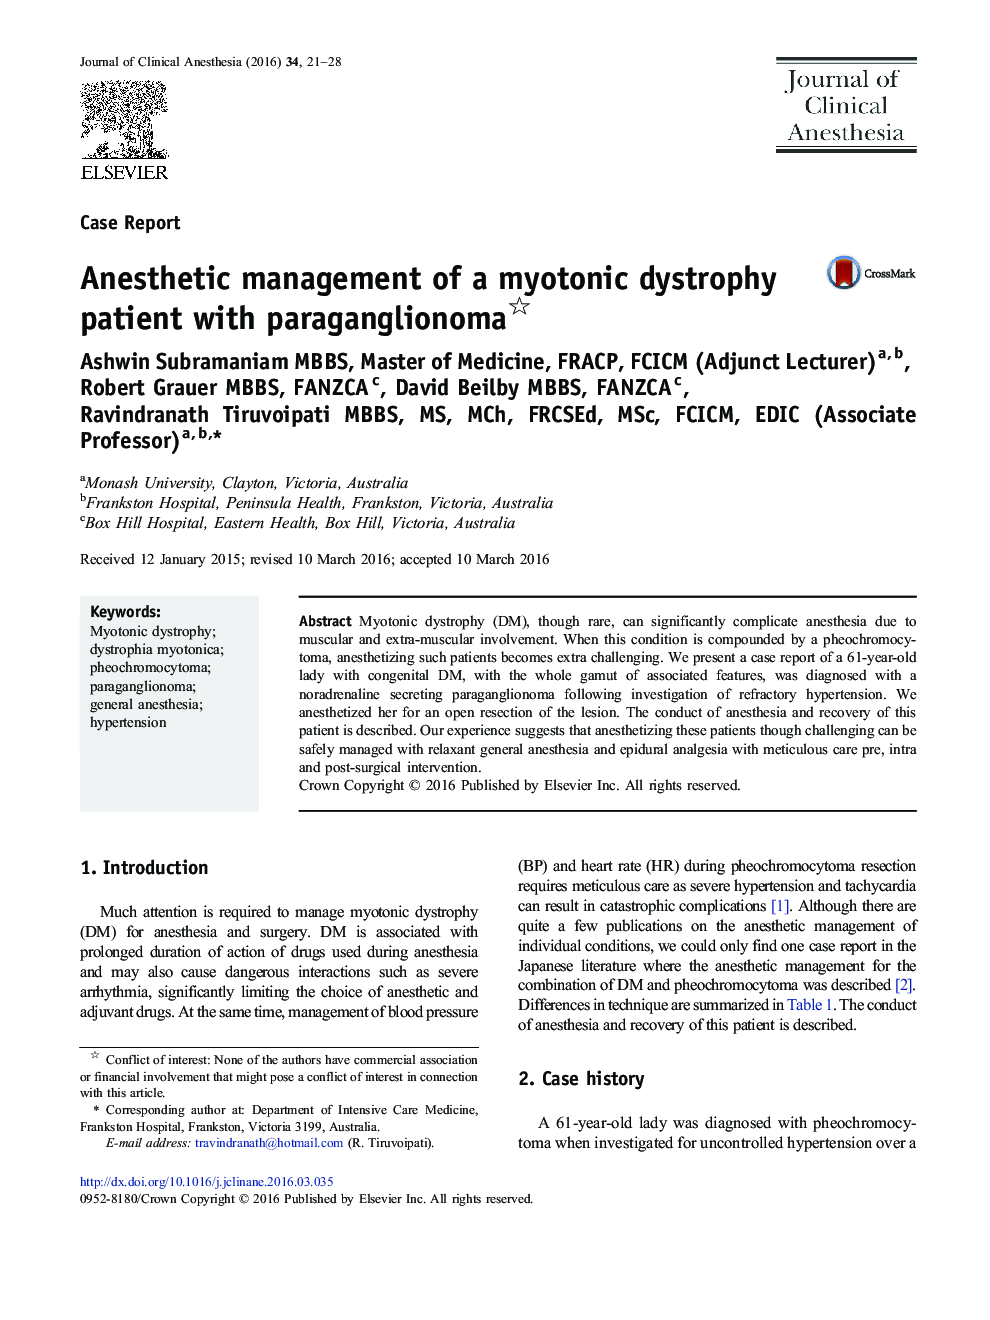 Anesthetic management of a myotonic dystrophy patient with paraganglionoma